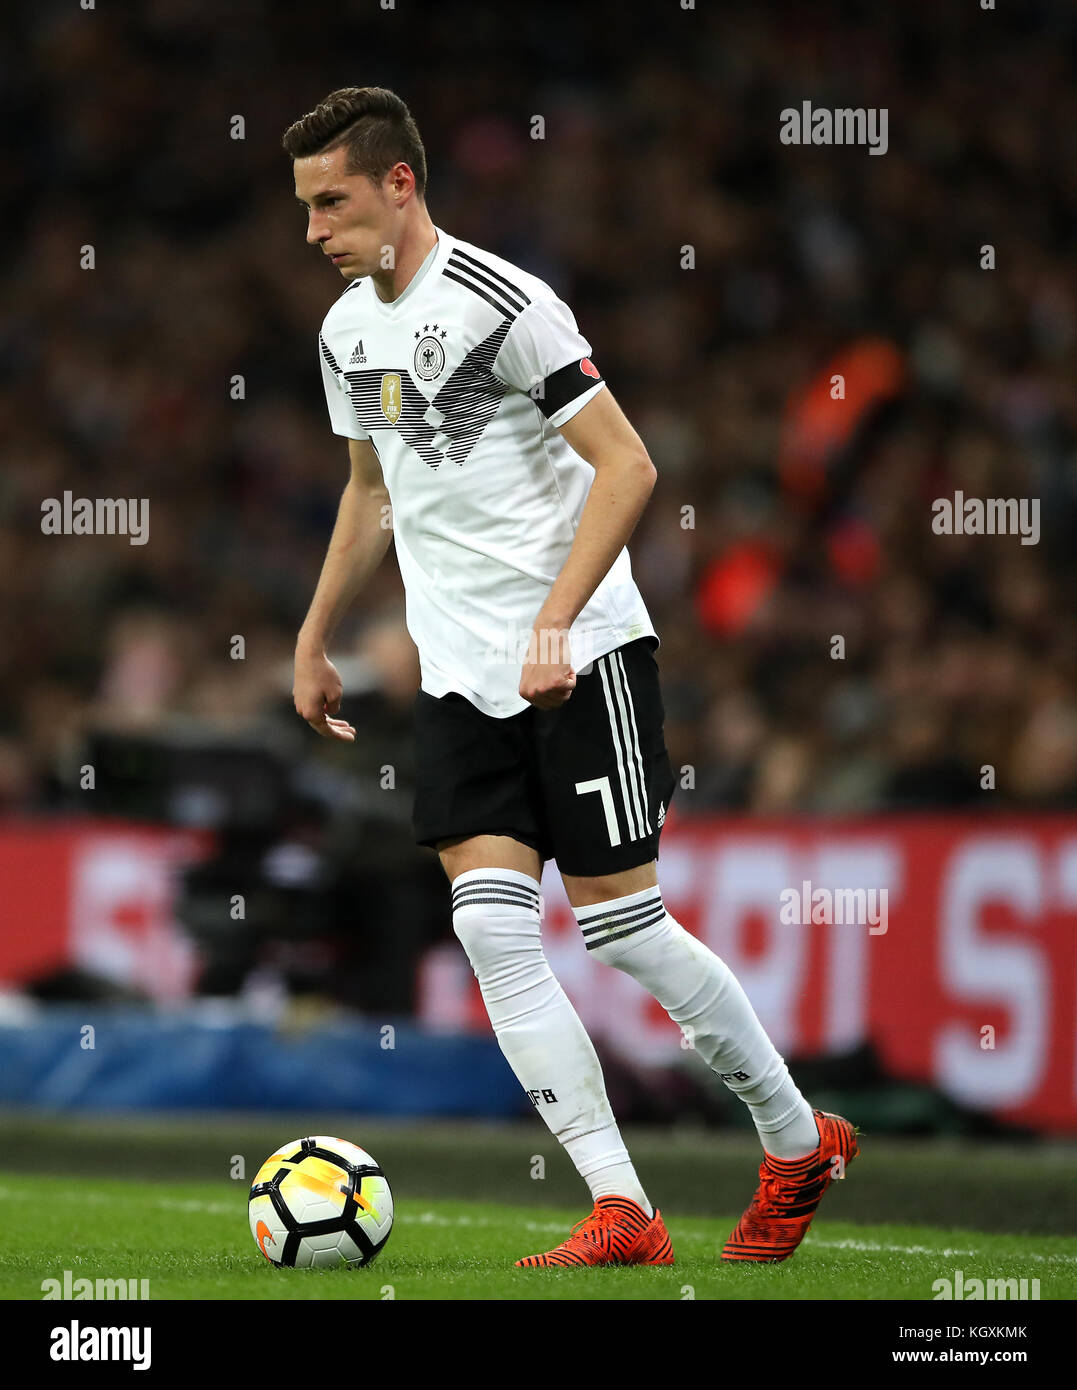 Germany's Julian Draxler during the International Friendly match at Wembley Stadium, London. PRESS ASSOCIATION Photo. Picture date: Friday November 10, 2017. See PA story SOCCER England. Photo credit should read: Nick Potts/PA Wire. RESTRICTIONS: Use subject to FA restrictions. Editorial use only. Commercial use only with prior written consent of the FA. No editing except cropping. Stock Photo